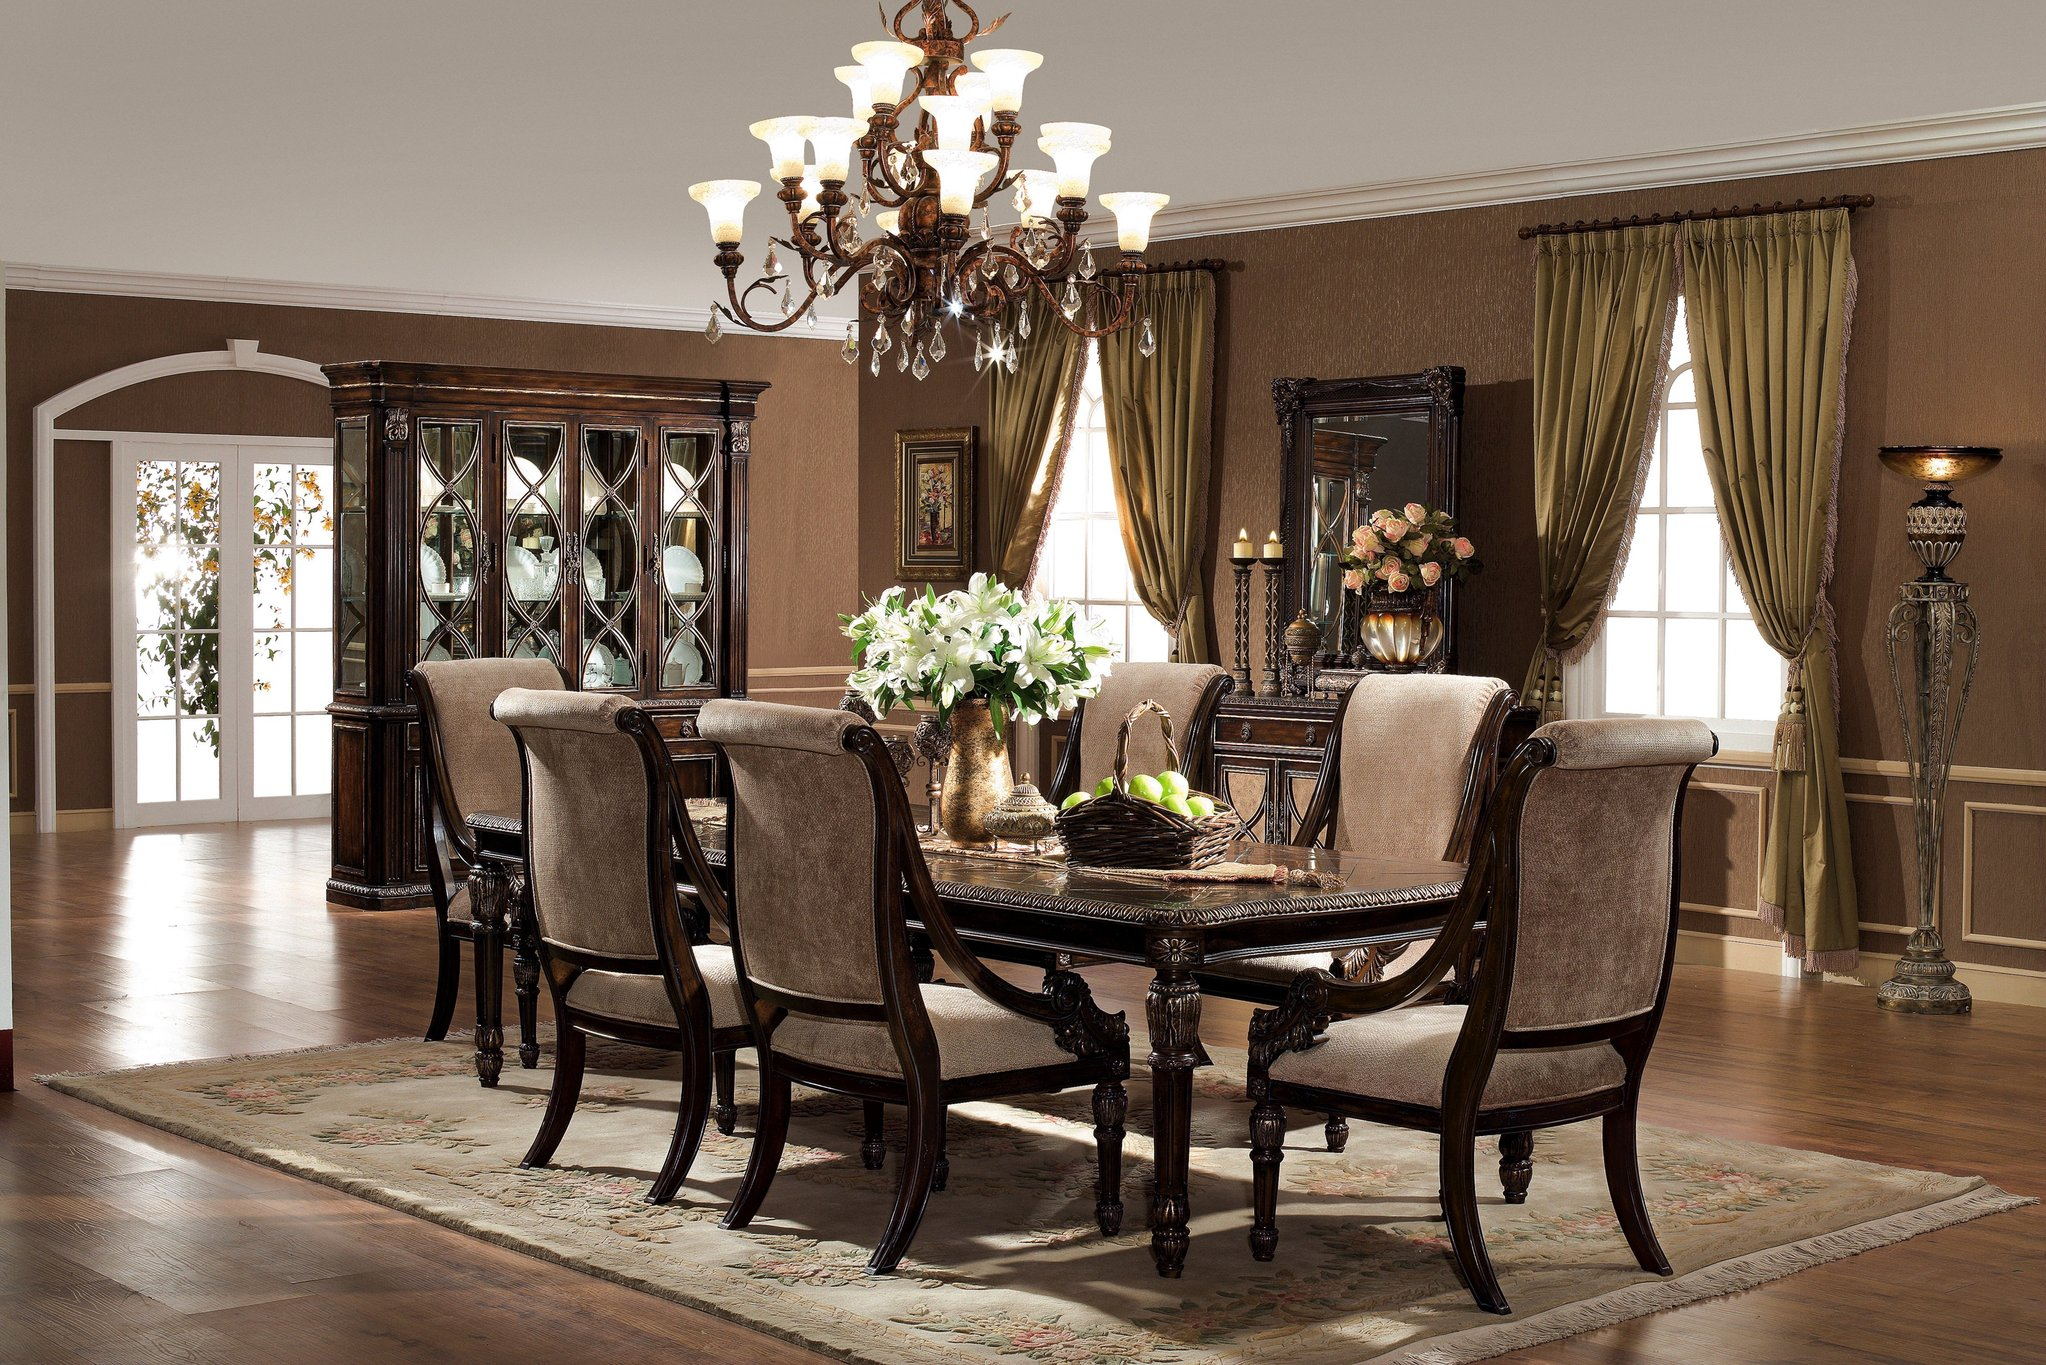 10 seating dining room set